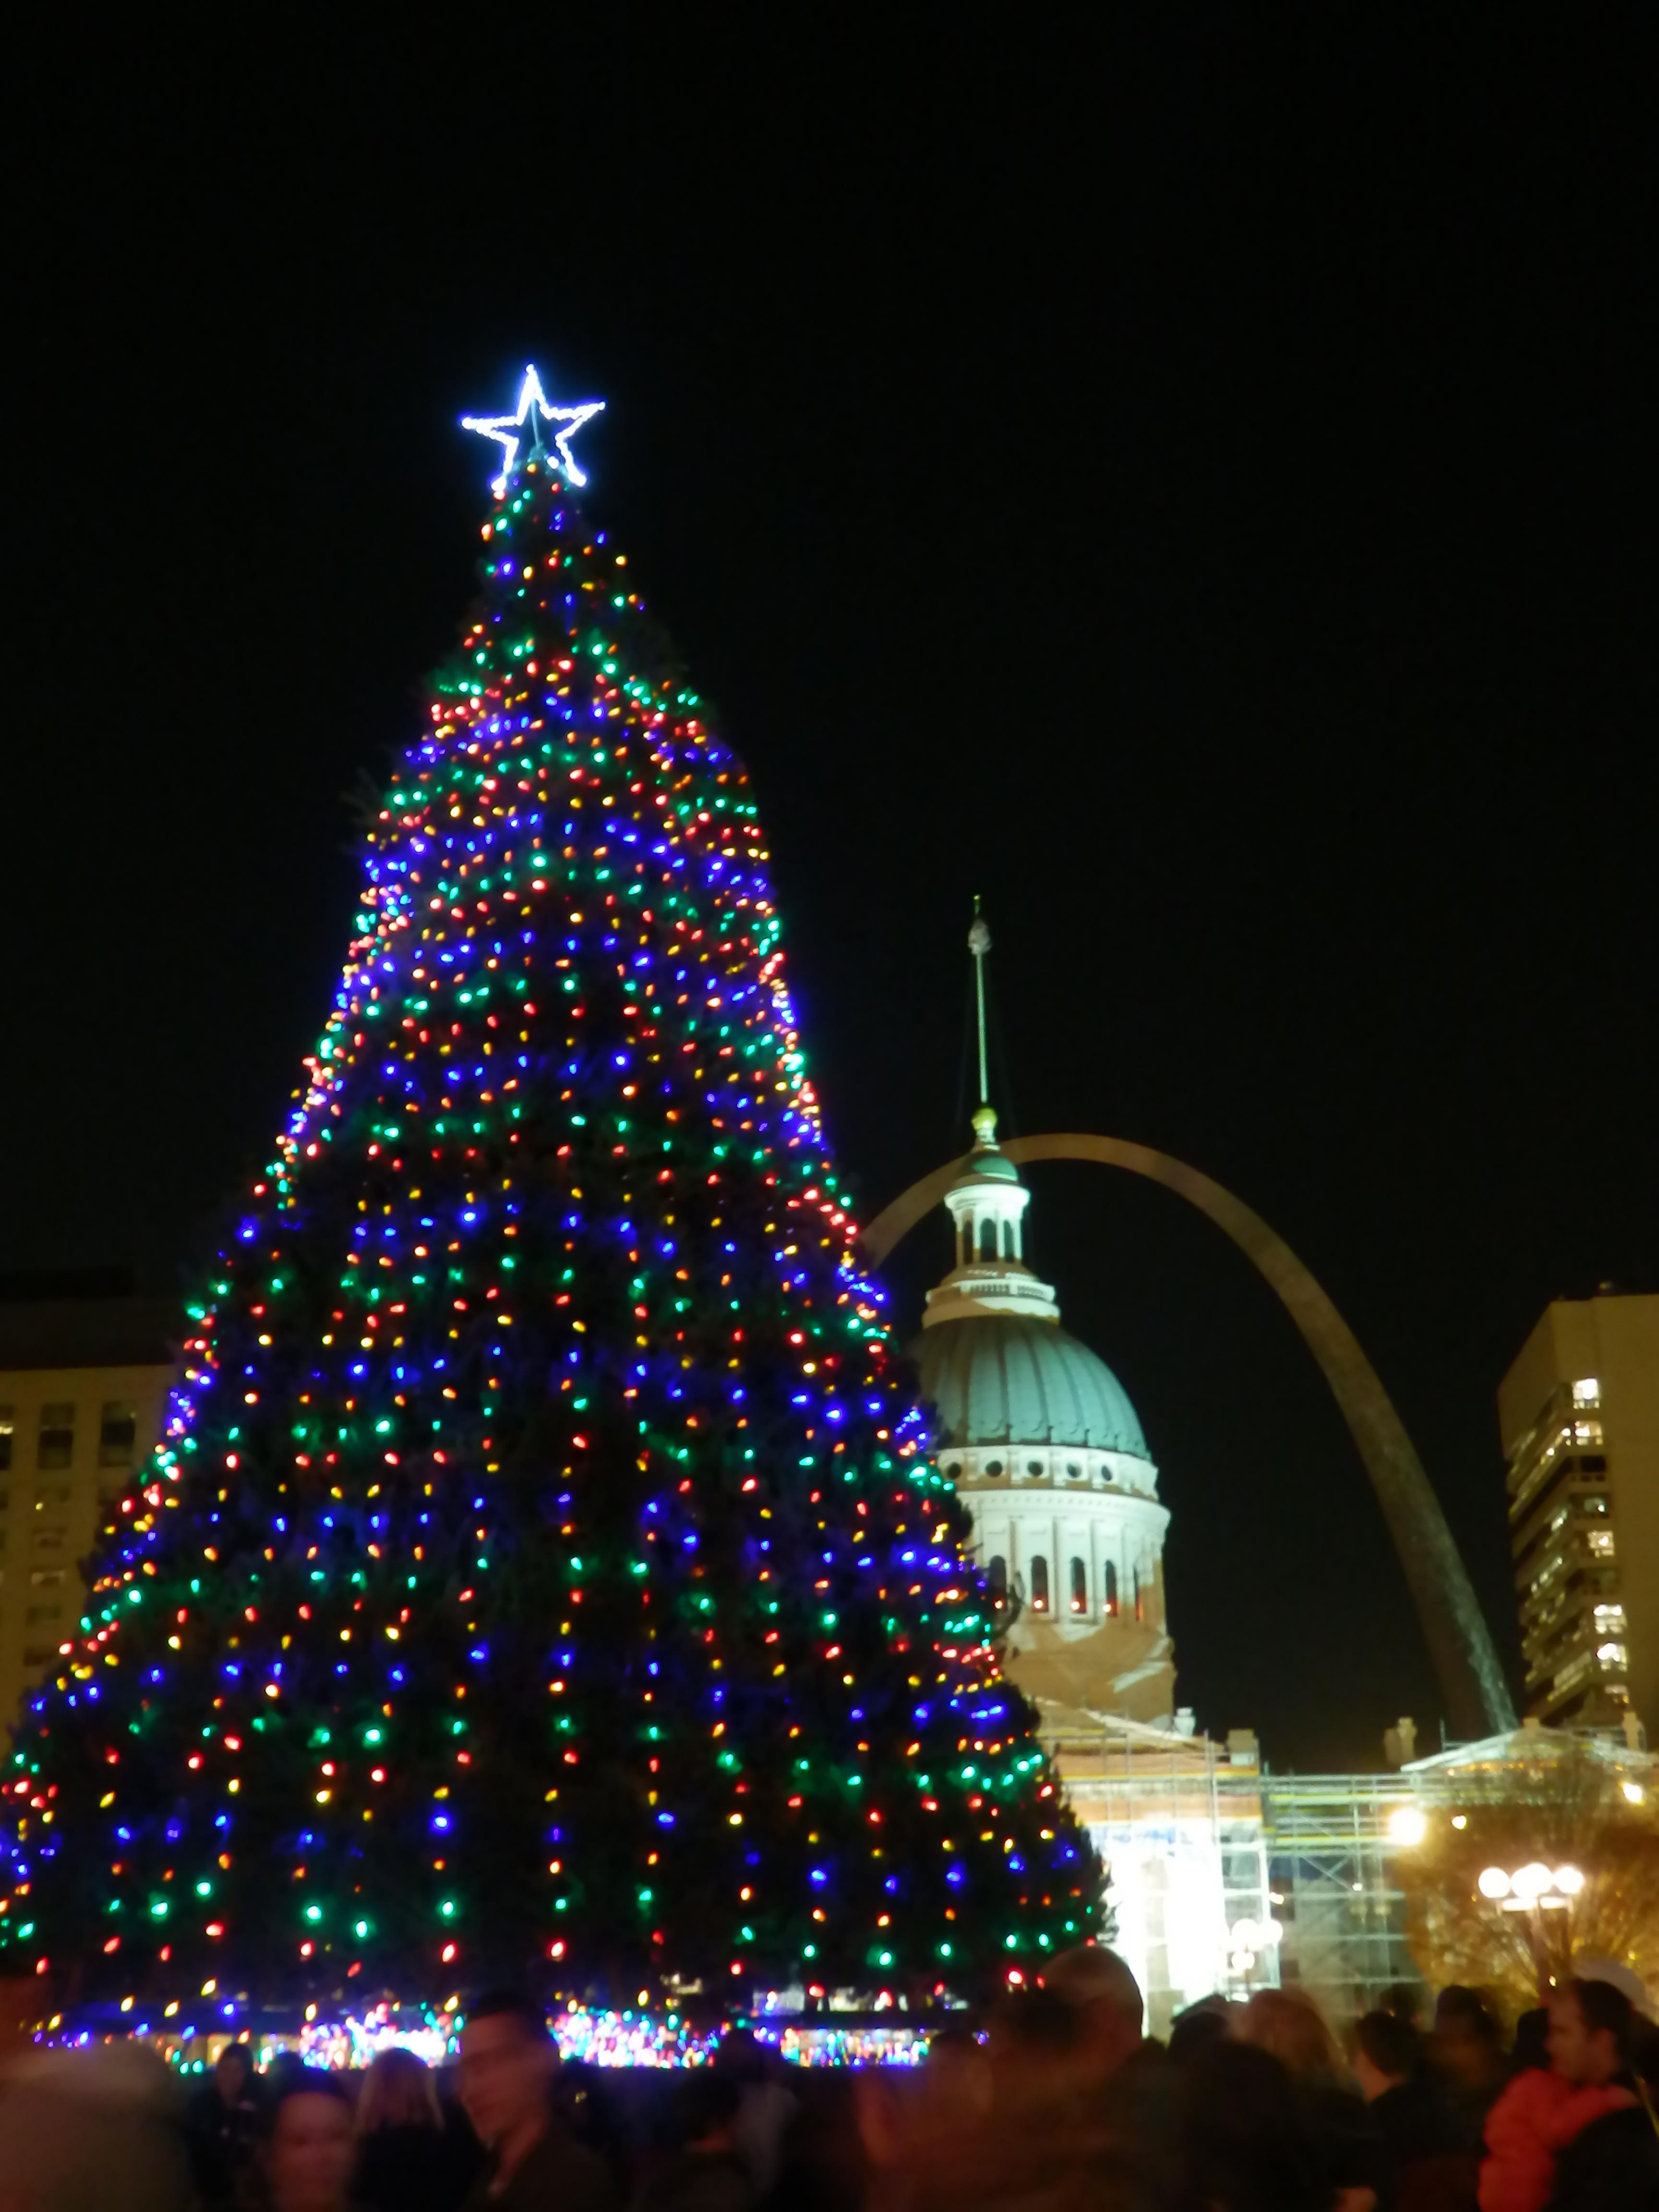 Salvation Army's Tree of Lights campaign helps year round